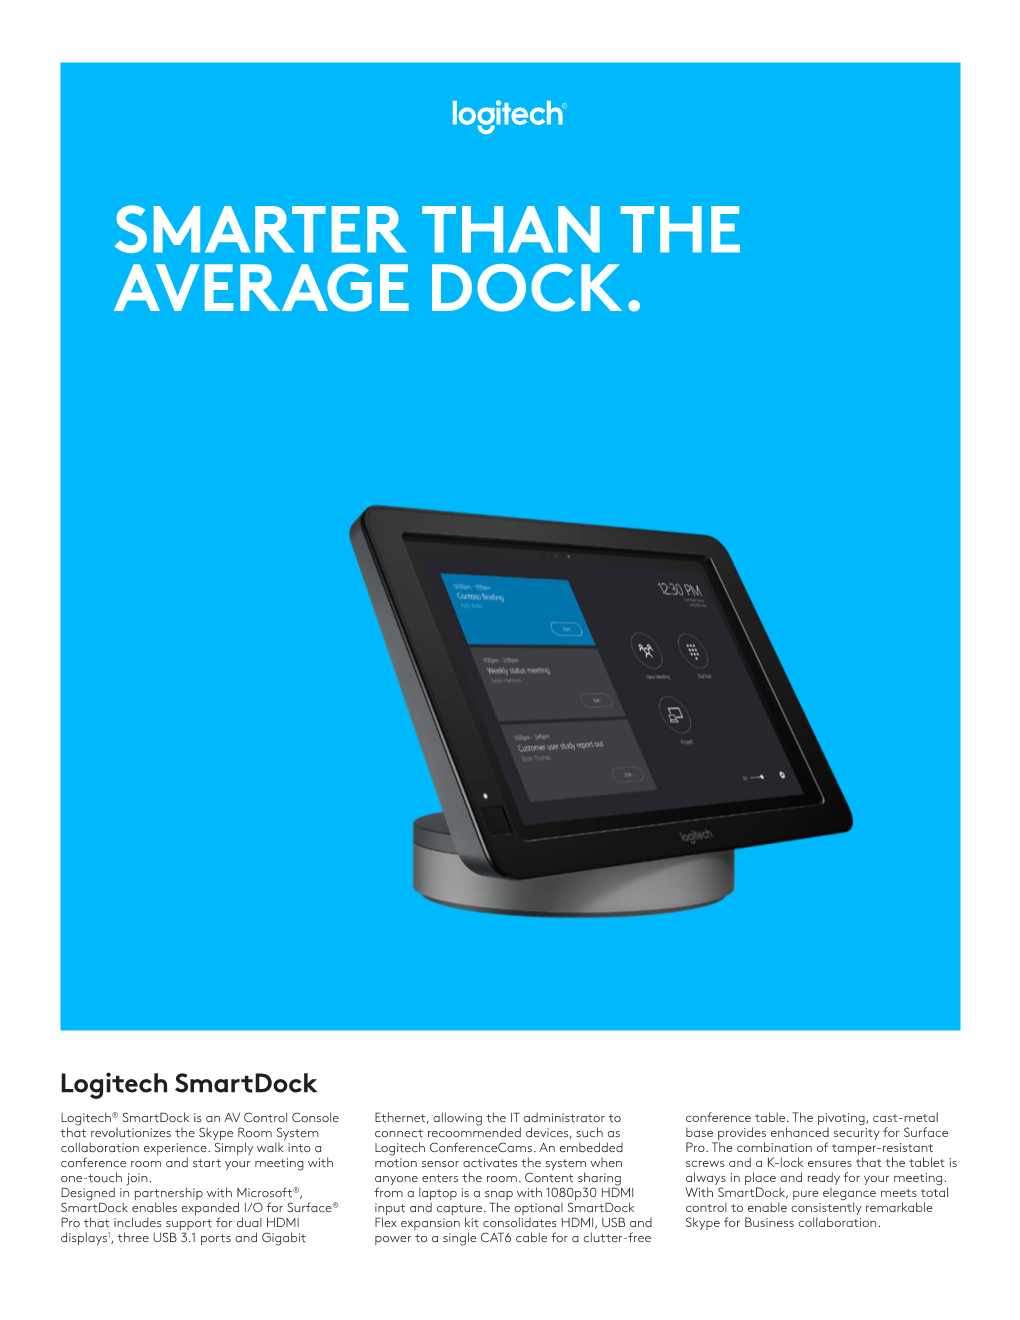 Smarter Than the Average Dock